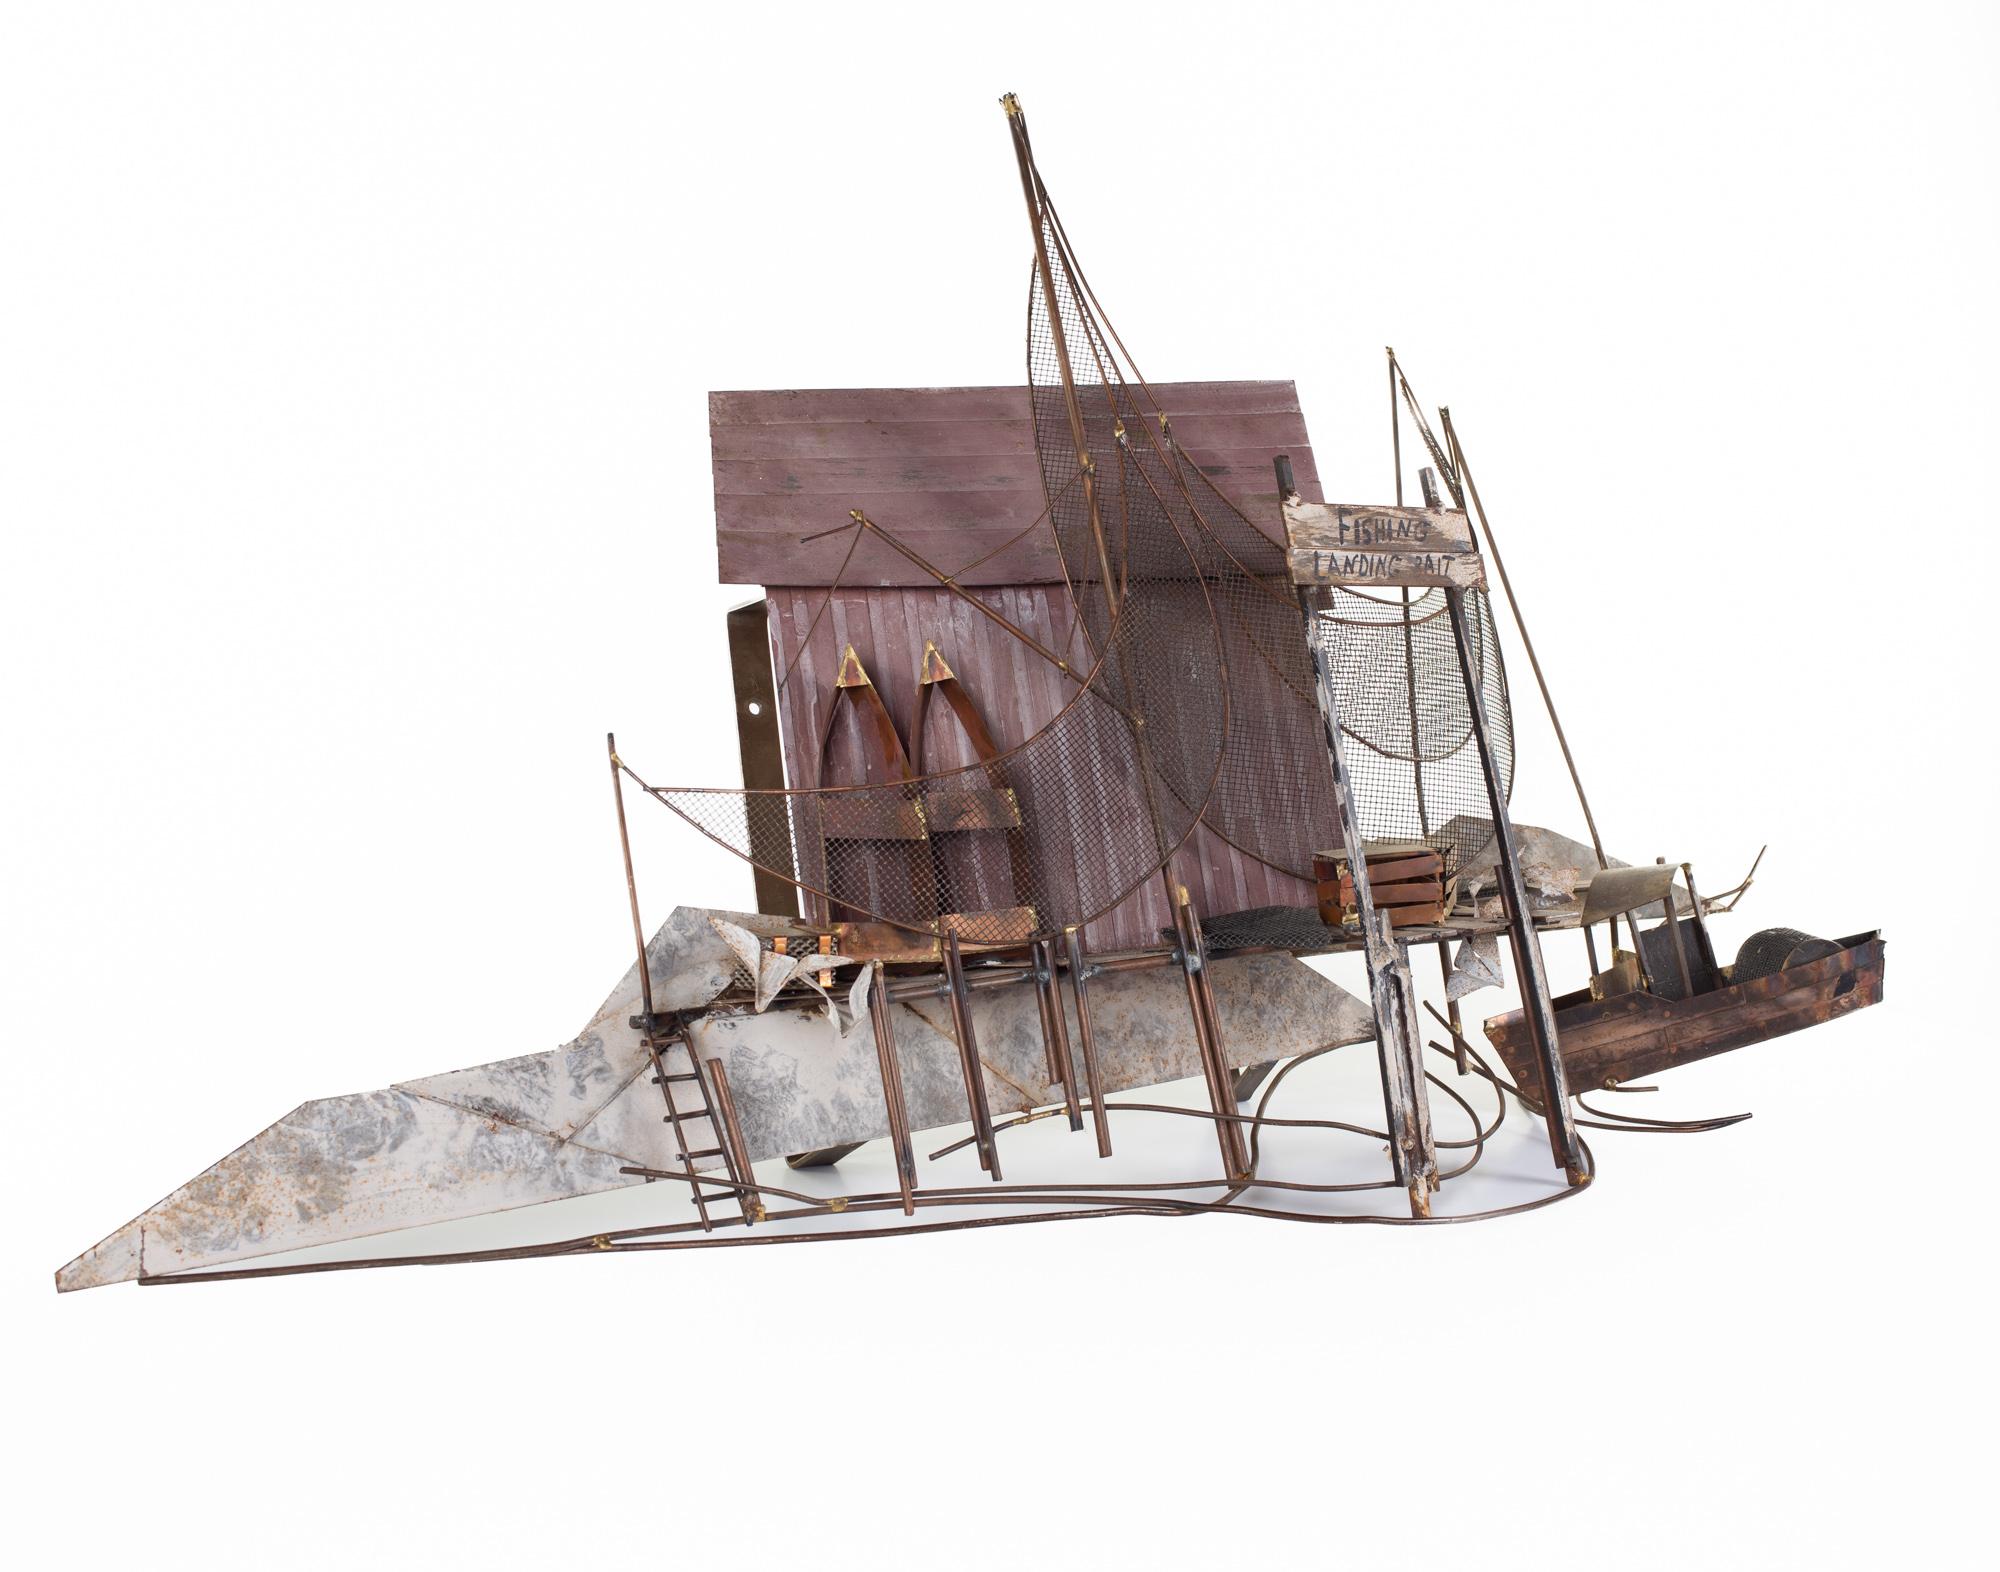 Curtis Jere mid century fishing village metal sculpture

This sculpture measures: 46 wide x 10.5 deep x 29 inches high

This sculpture is in Excellent Vintage Condition with minor marks, dents, and wear.

We take our photos in a controlled